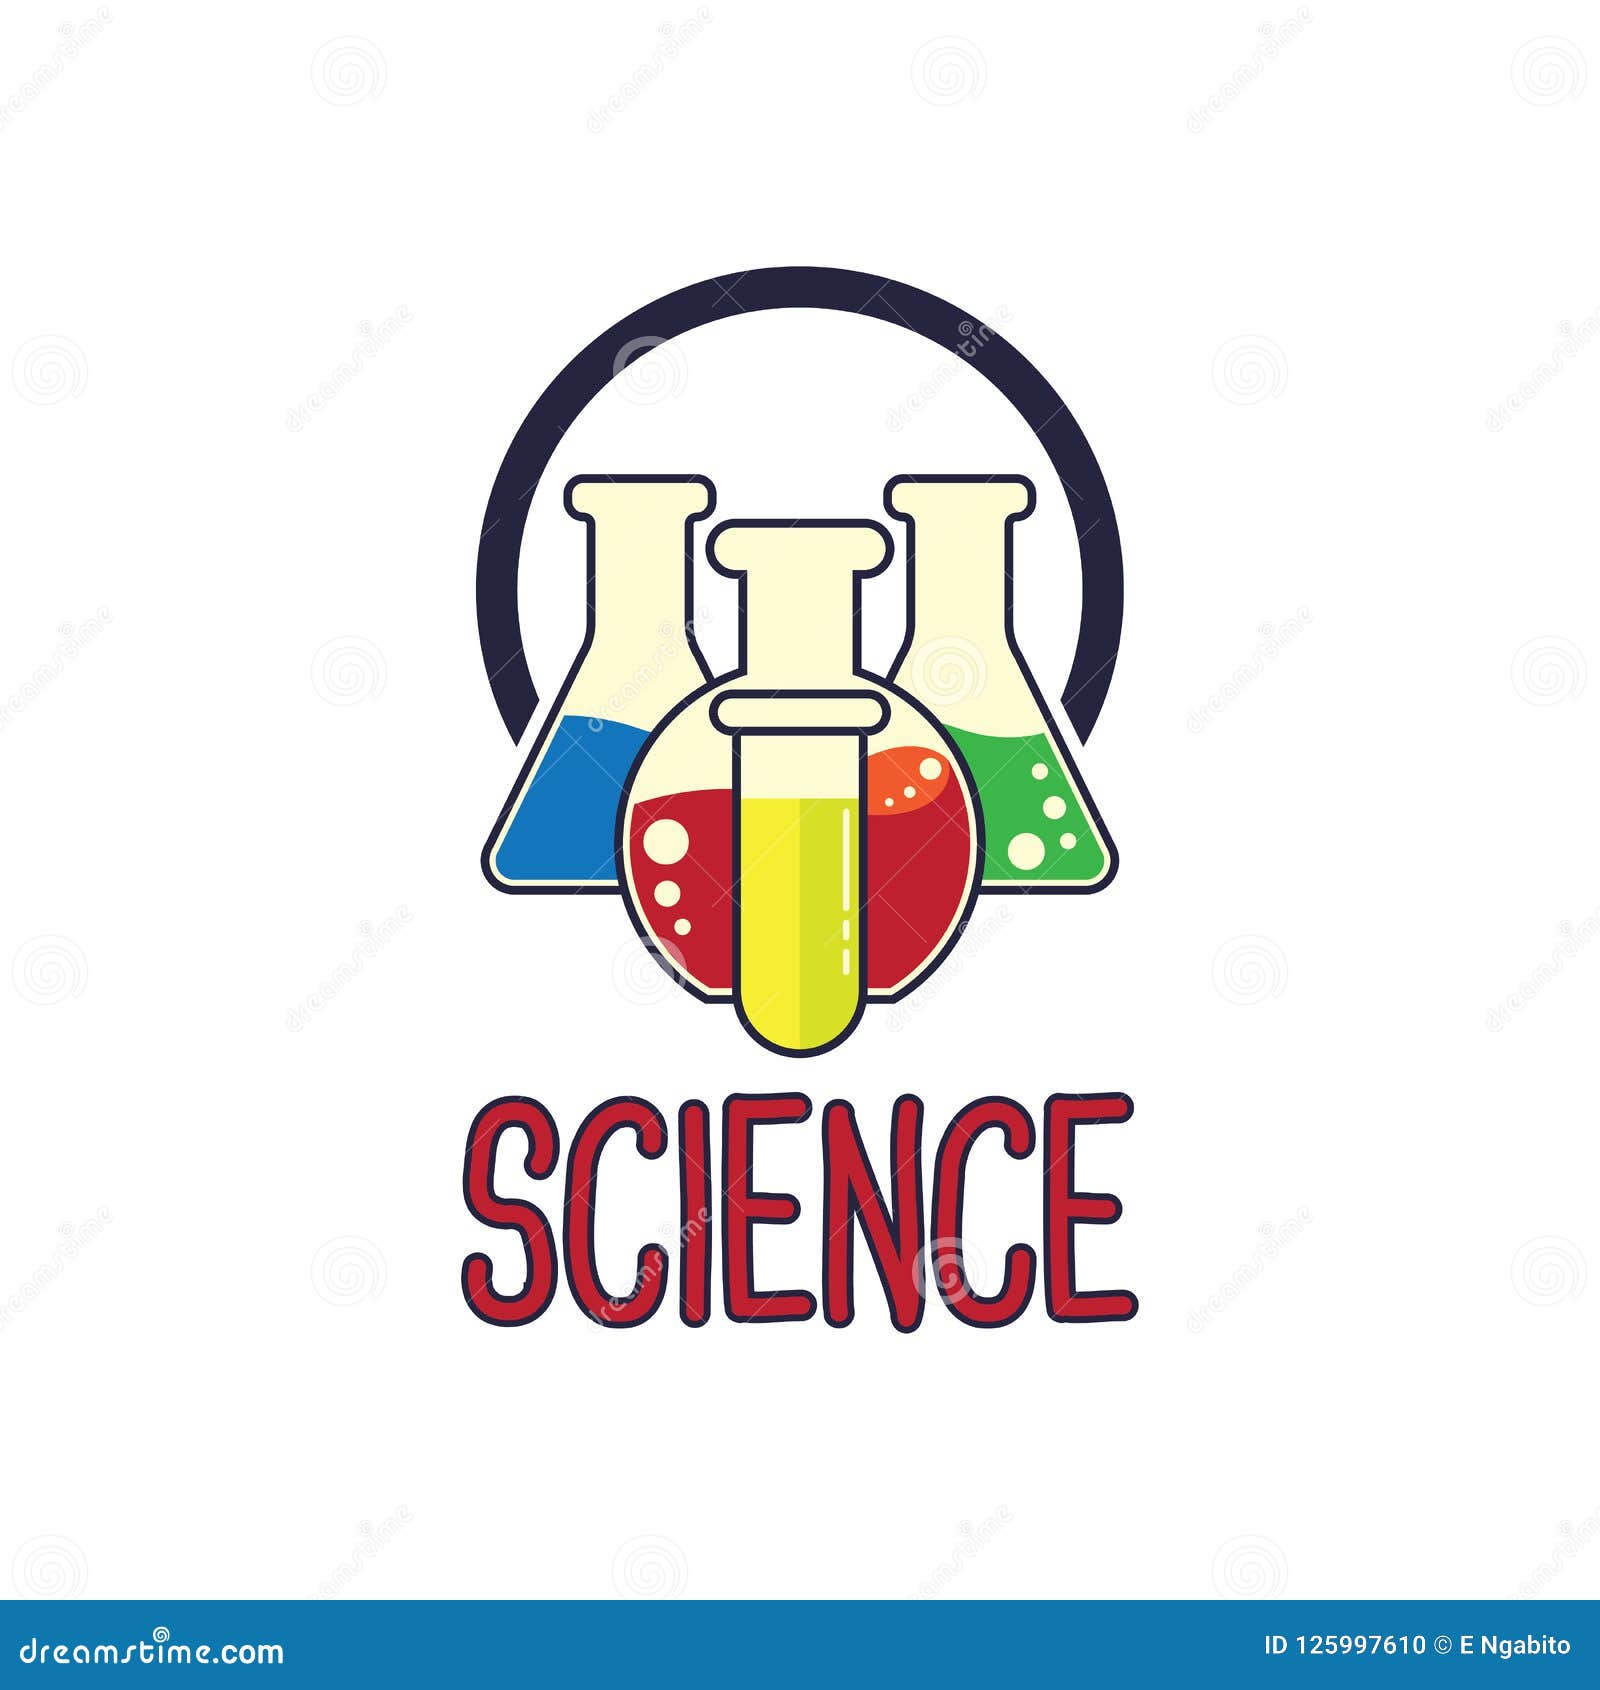 Research And Development Logo